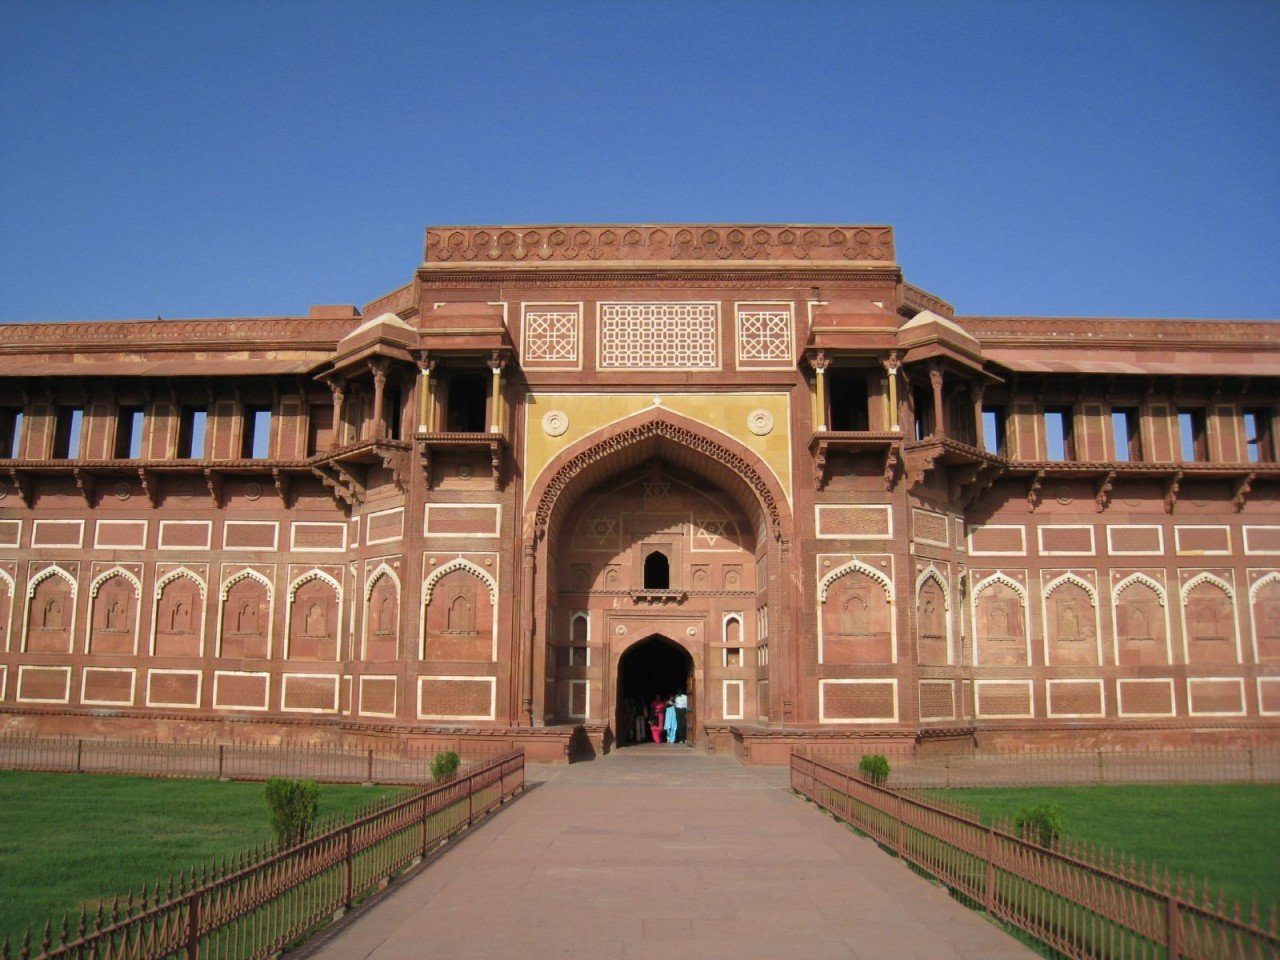 The Red Fort in Agra, India